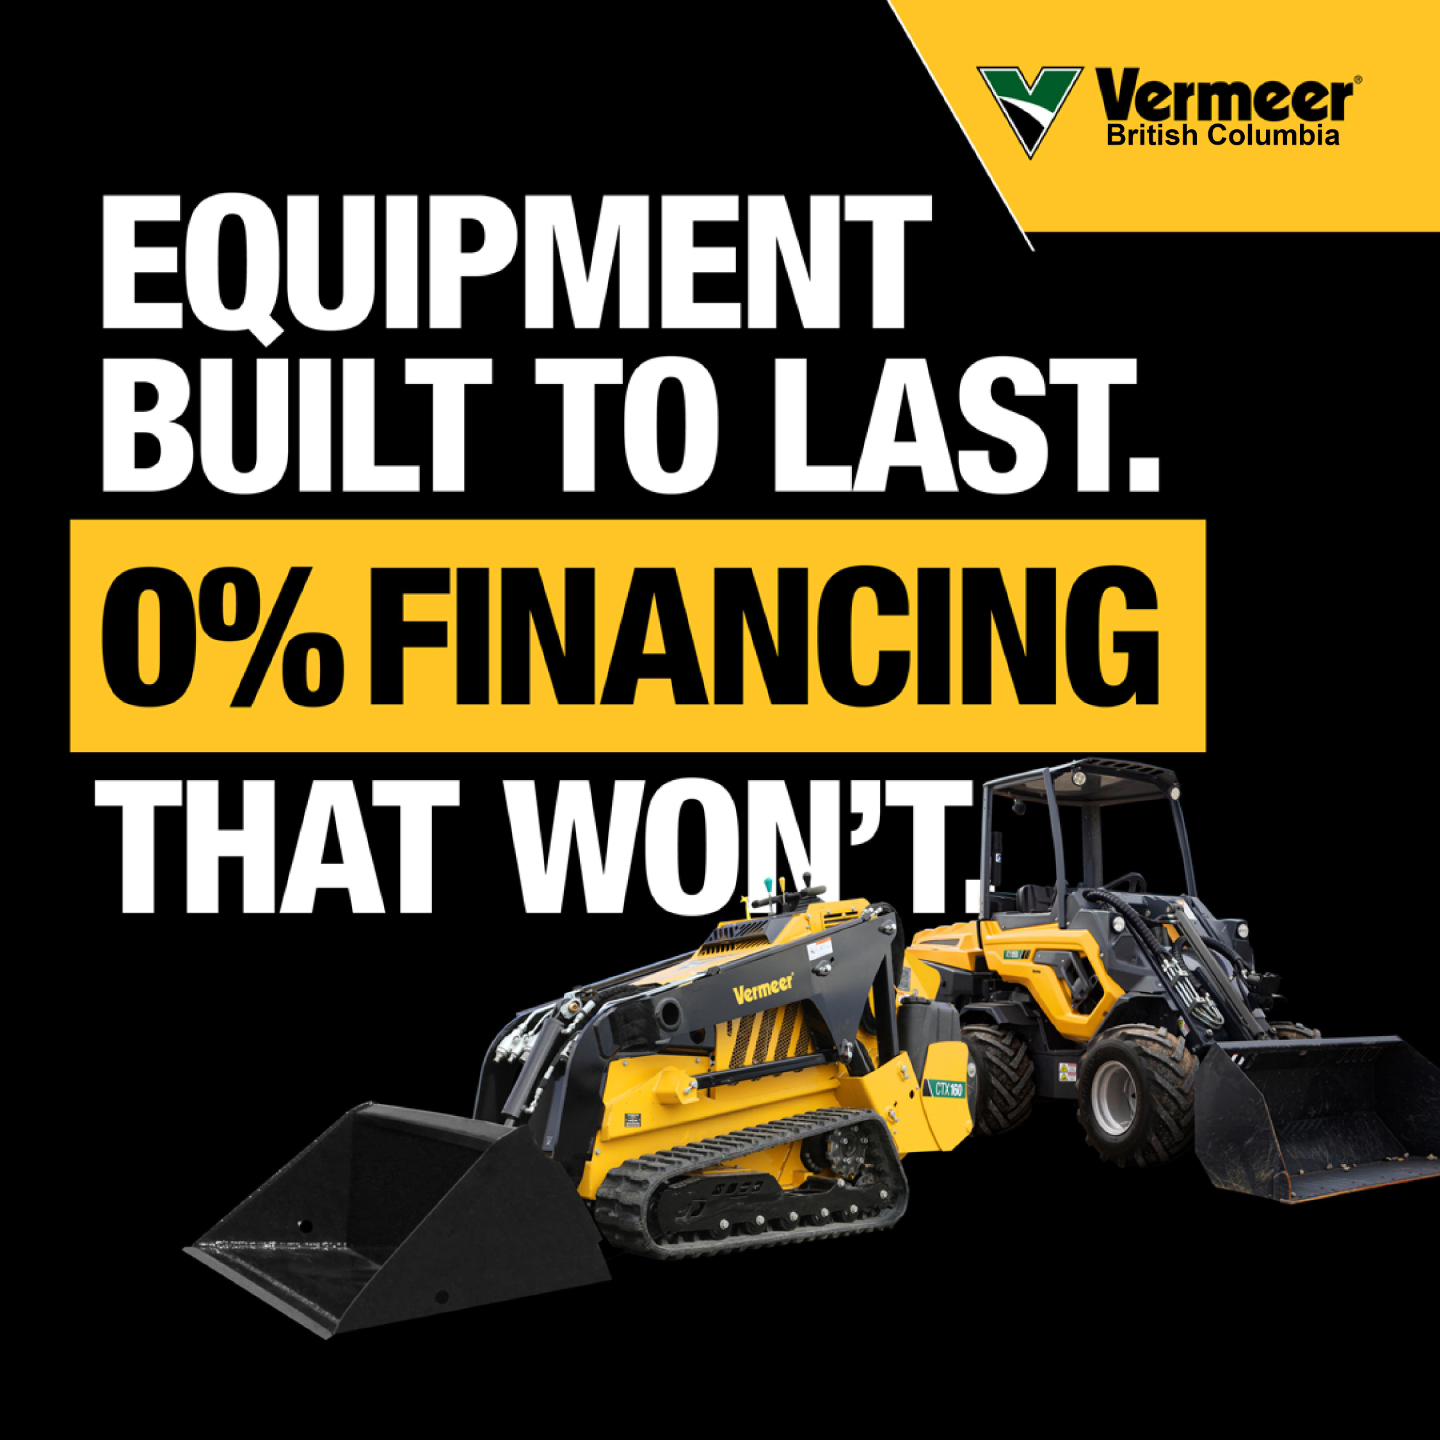 Ready to take productivity up a notch?
Get 0% financing on Vermeer mini skid steers and compact articulated loaders (ATXs) now through July 31. Alternative rates available for terms up to 60 months! Chat with us online or stop by one of our locations to find out more.

#0Finance #ZeroPercent #SpecialOffer #vermeerequipment #vermeer #ATX #MiniSkid #TreeCare #Landscaping #CompactLoaders